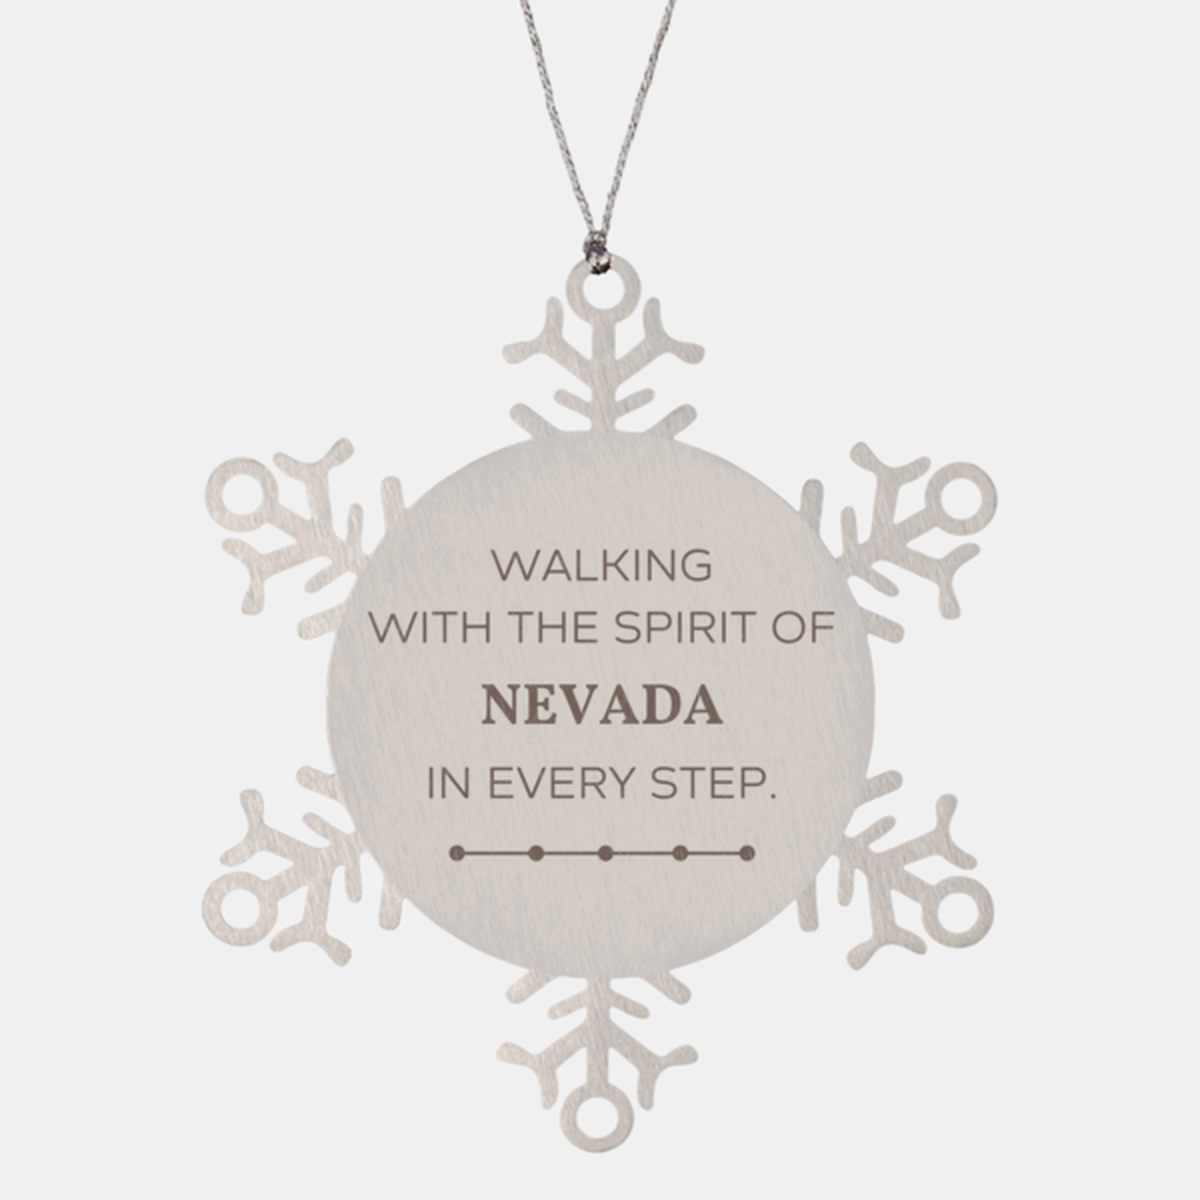 Nevada Gifts, Walking with the spirit, Love Nevada Birthday Christmas Snowflake Ornament For Nevada People, Men, Women, Friends